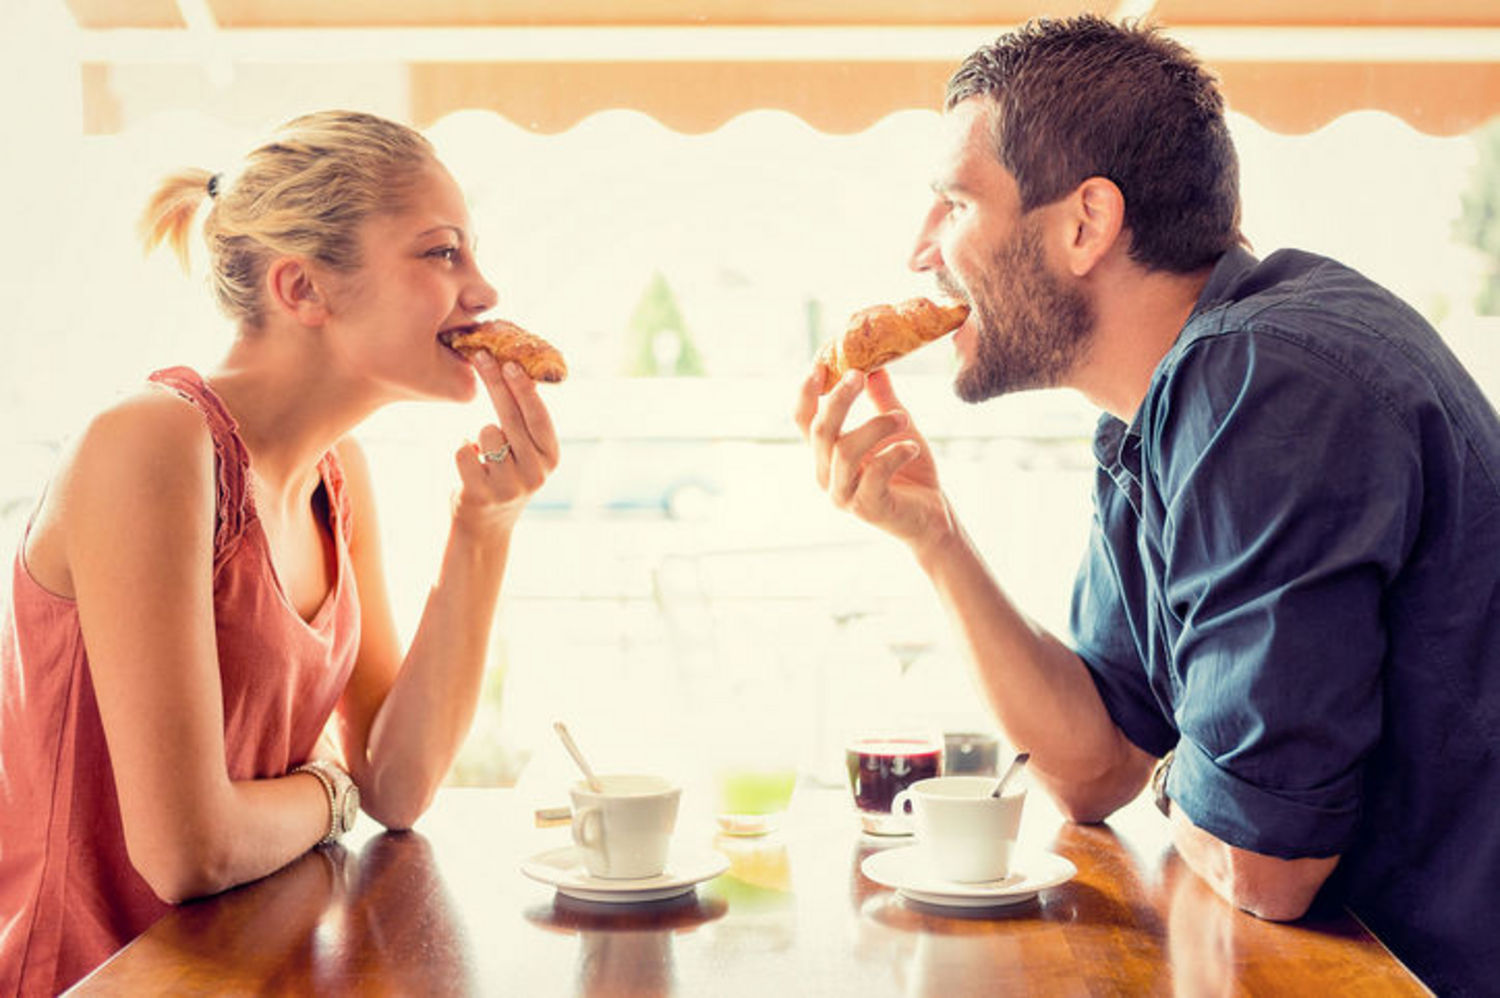 🧠 This Word Association Test Will Determine If You Have a Male or Female Brain Couple Eating Croissant